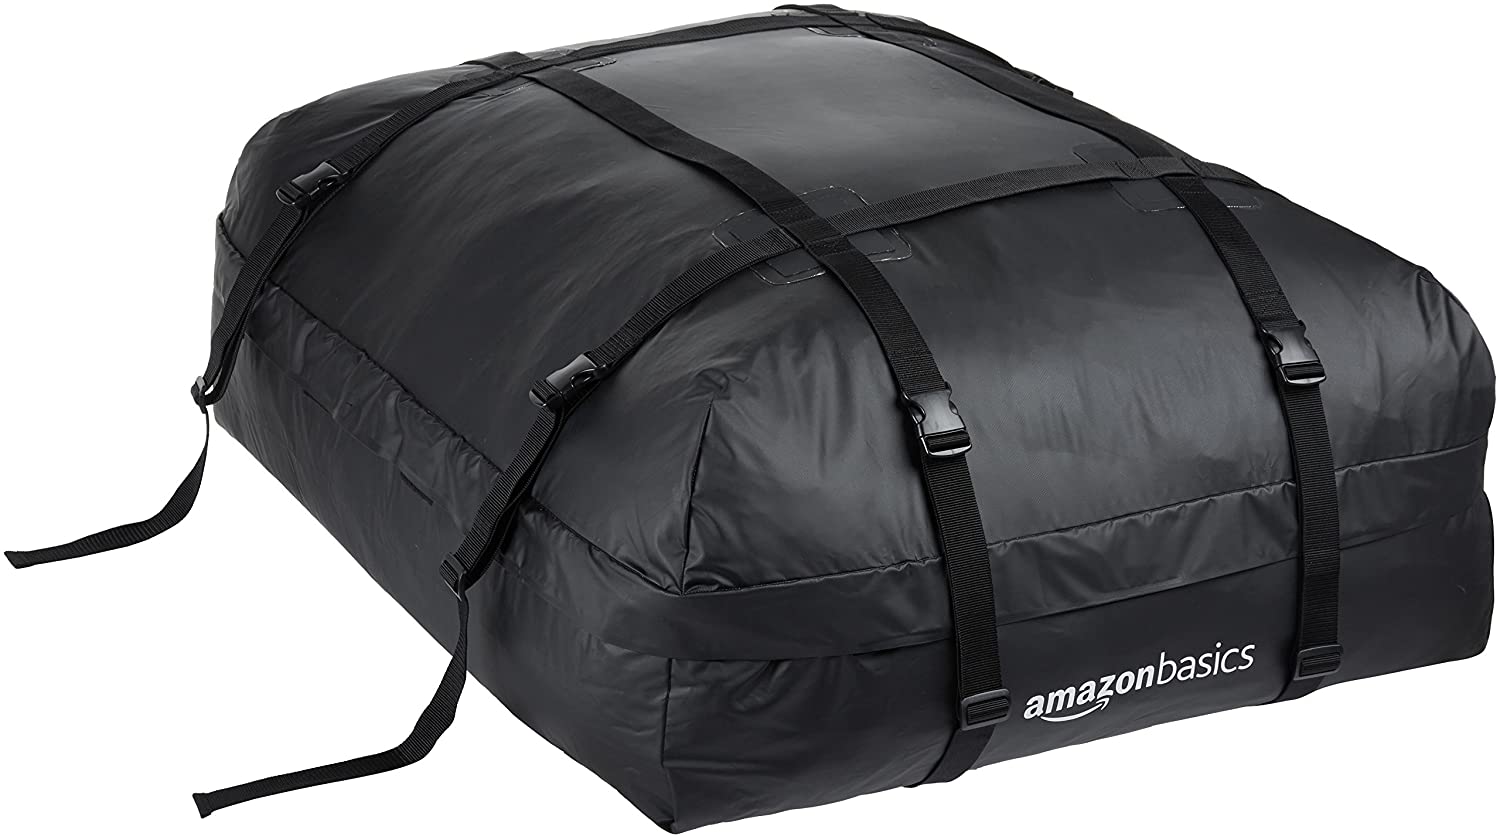 Amazon Basics ZH1705156 Rooftop Cargo Carrier Bag, Black, 15 cu. ft. (Rooftop)